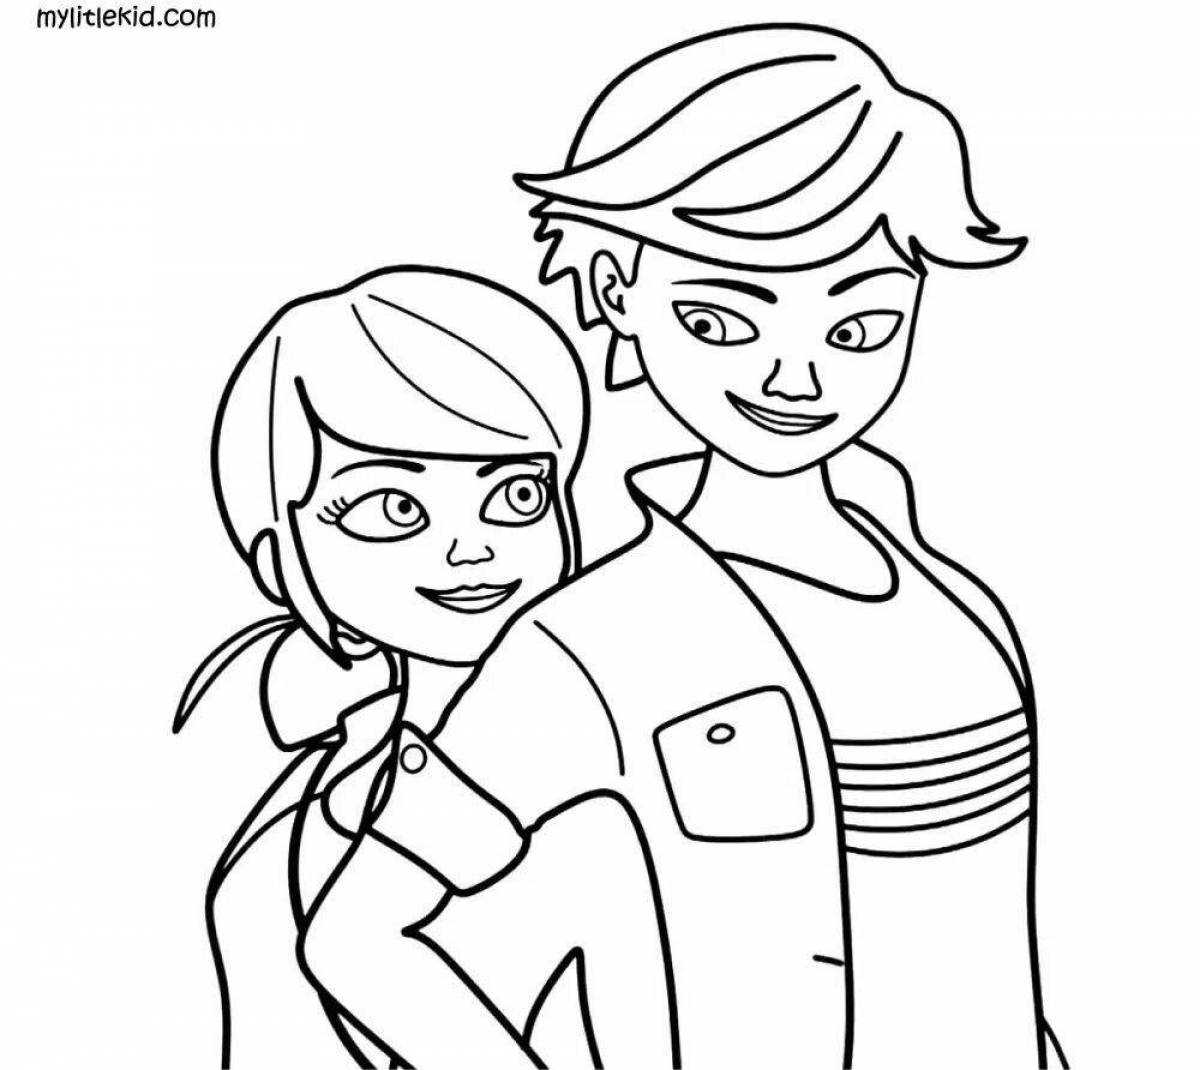 Amazing marinette and adrien coloring book